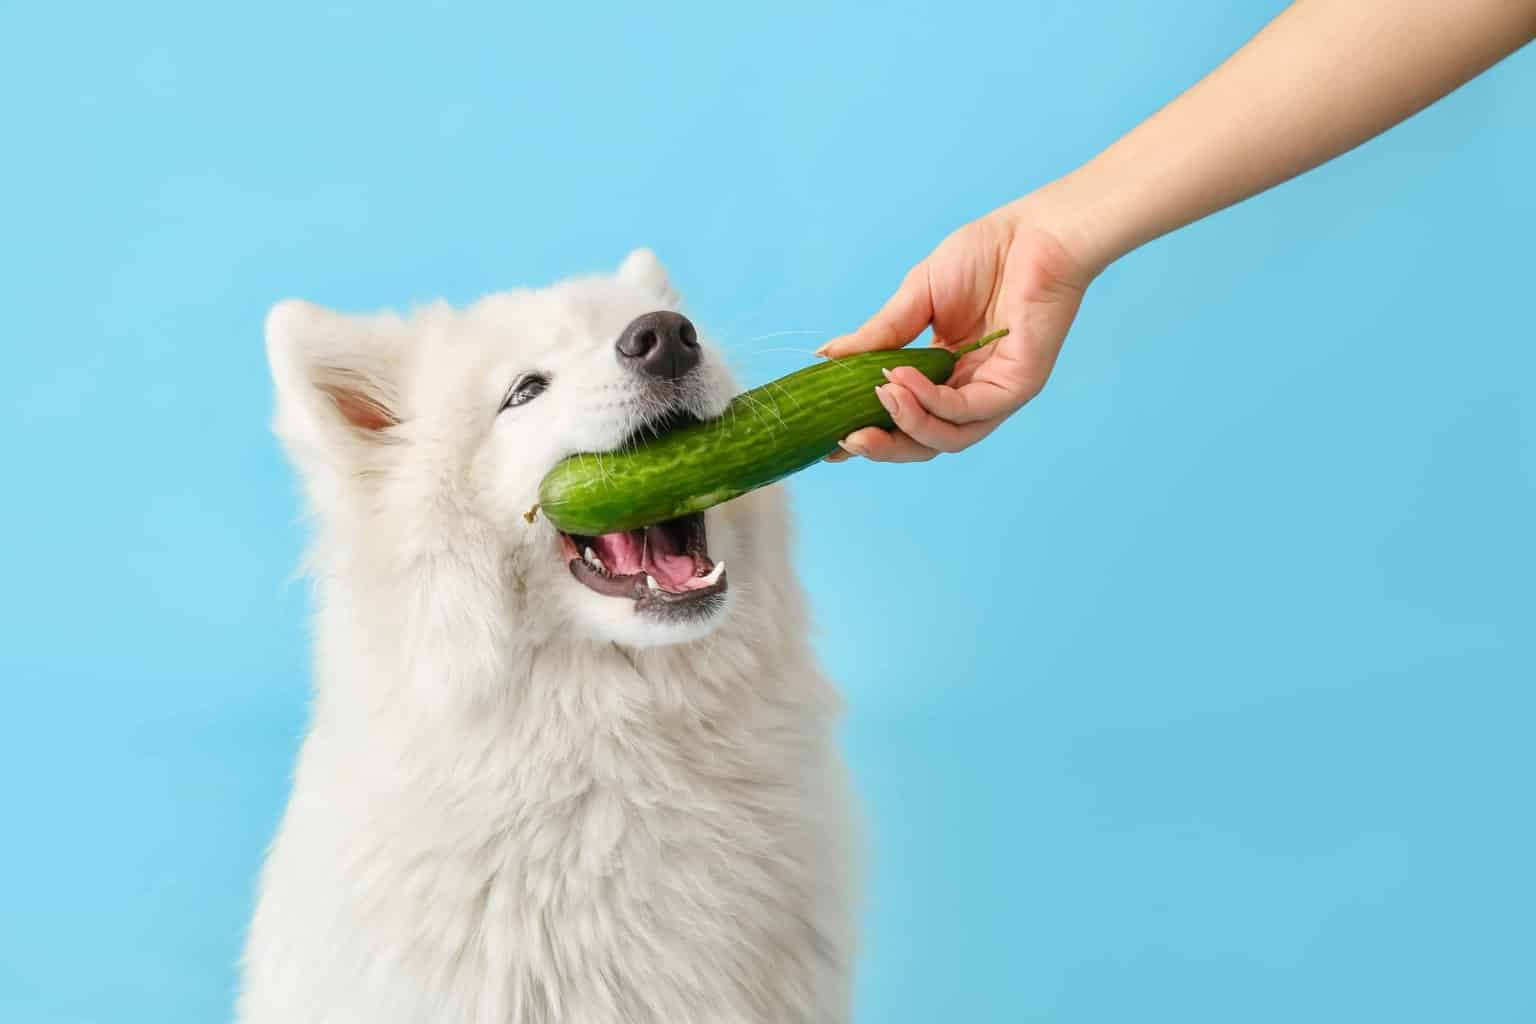 Cute samoyed eats cucumber. Cucumbers can be a healthy and refreshing option for dogs. Just feed them in moderation and avoid peels and seeds, which upset tummies.